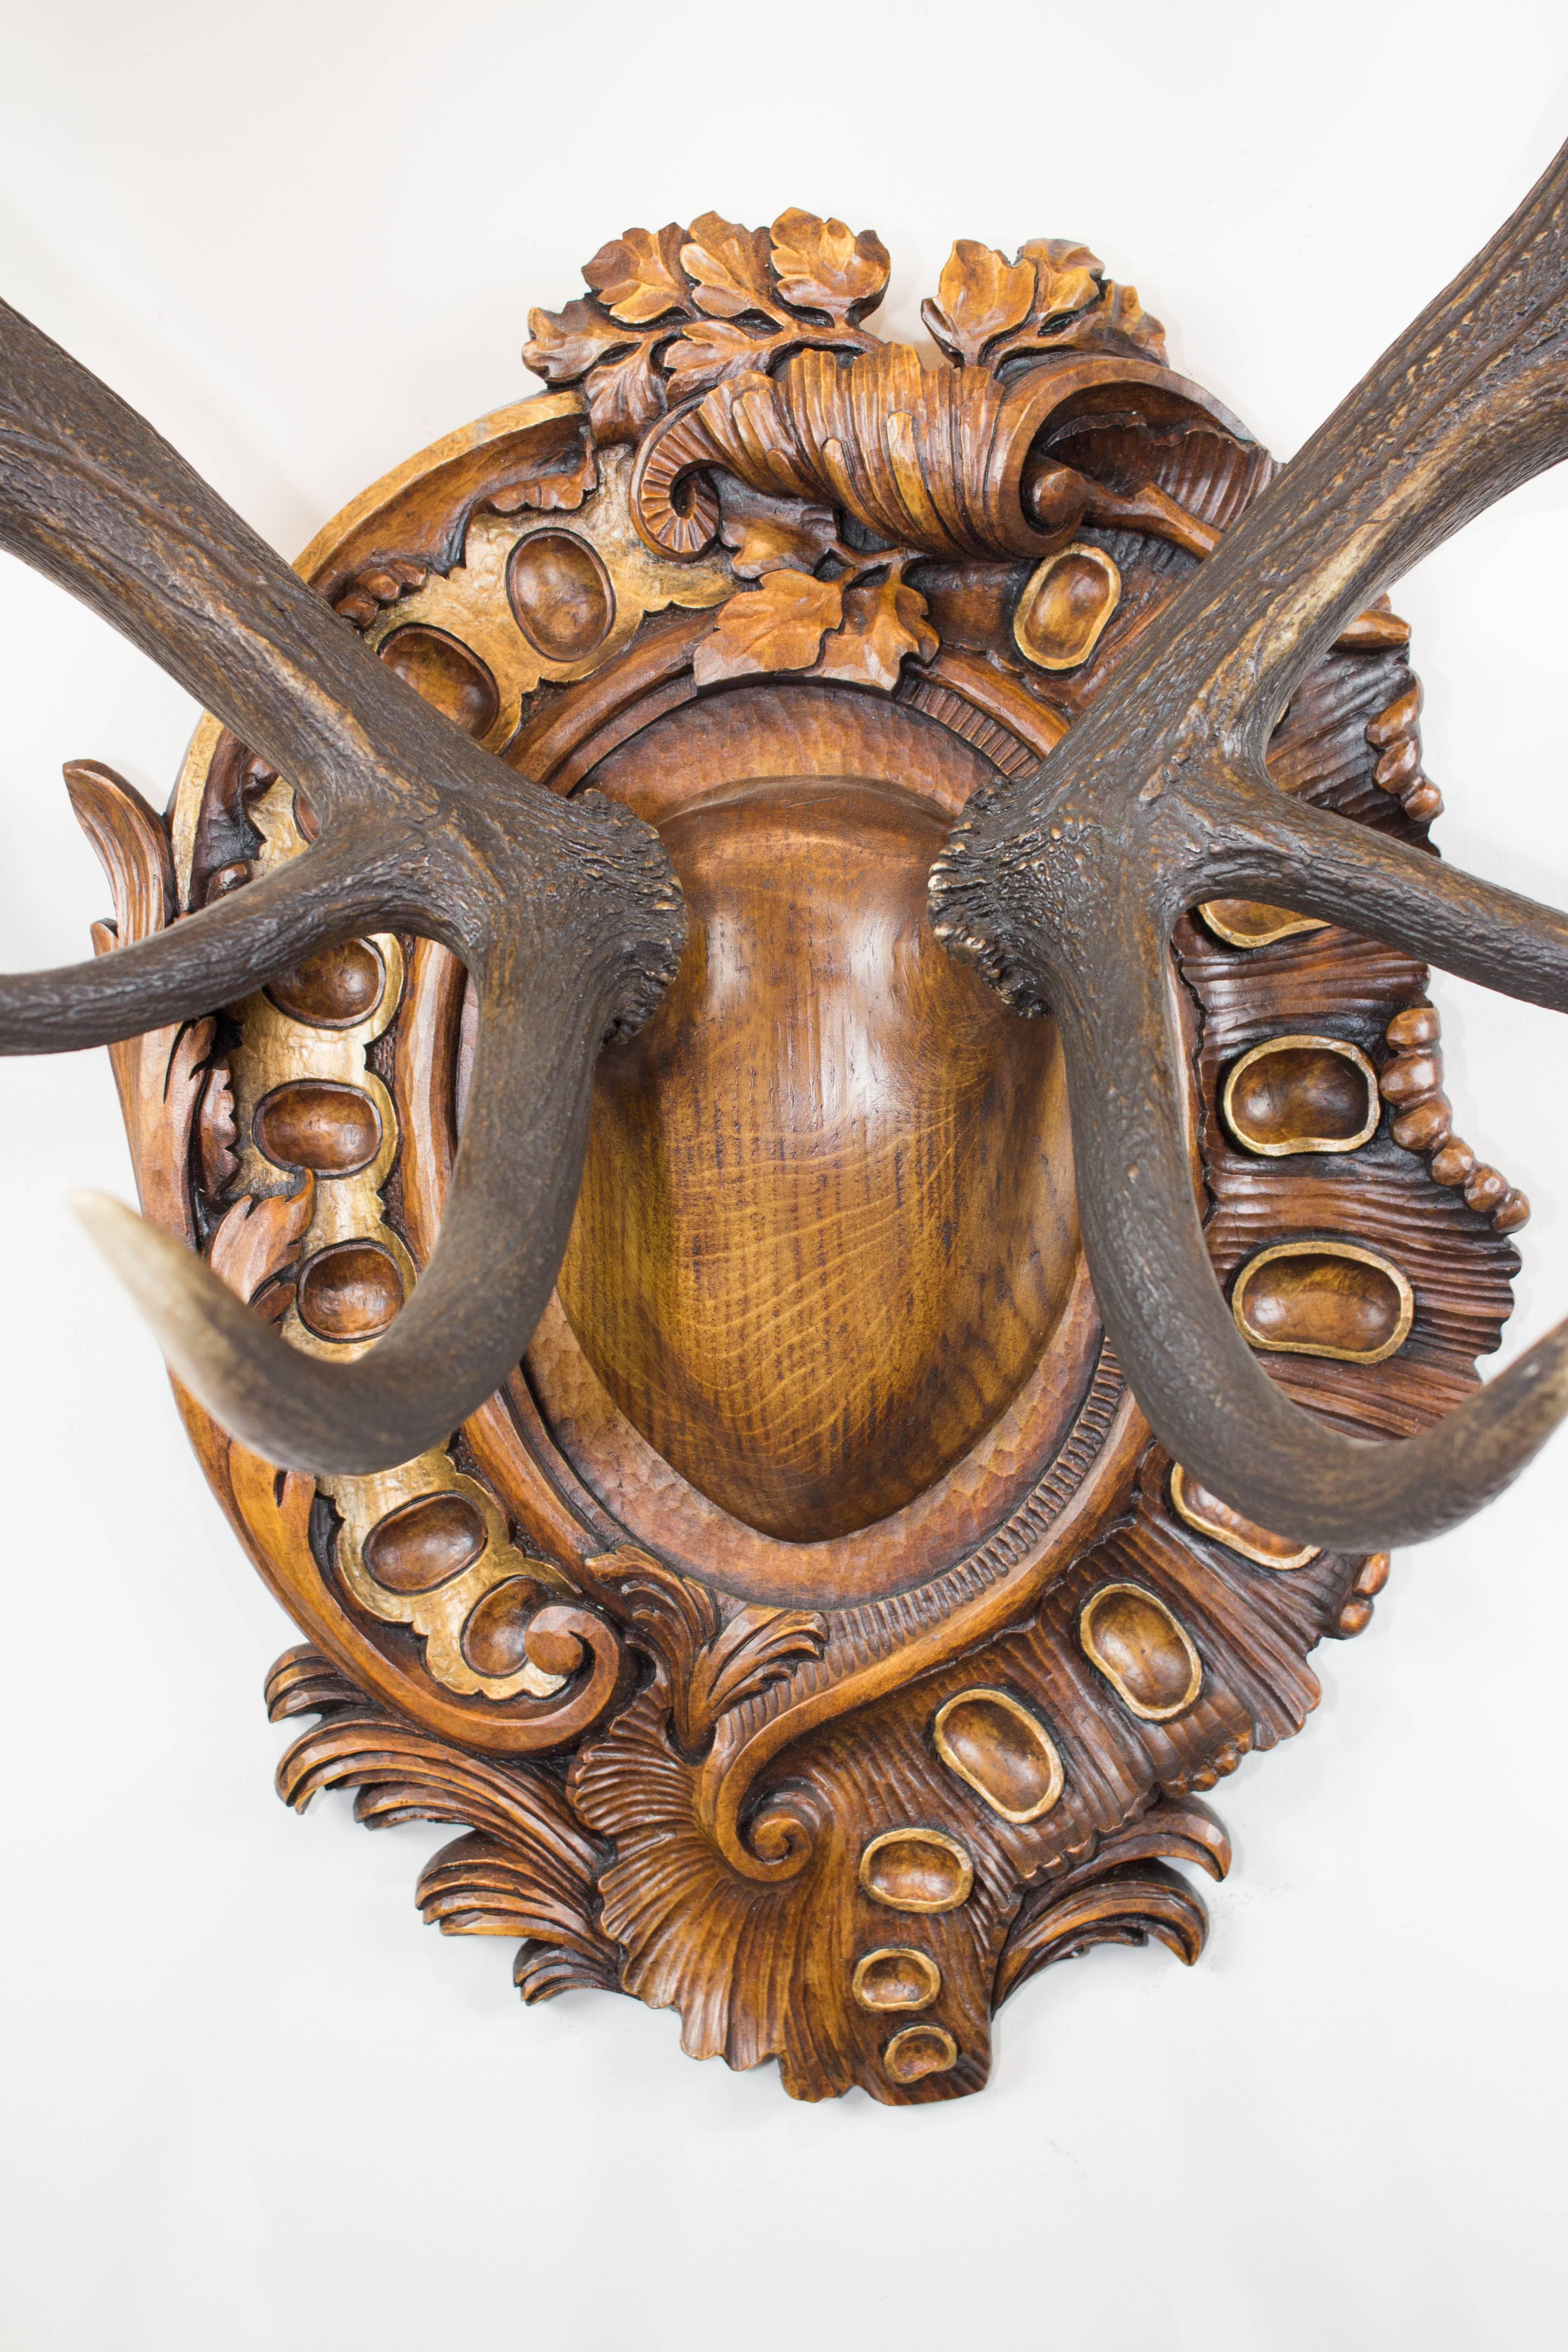 19th century Fallow Deer trophy on replacement hand-carved plaque that hung in Emperor Franz Joseph's castle at Eckartsau in the Southern Austrian Alps. Eckartsau was a favorite hunting schloss of the Habsburg family. The hand-carved linden wood